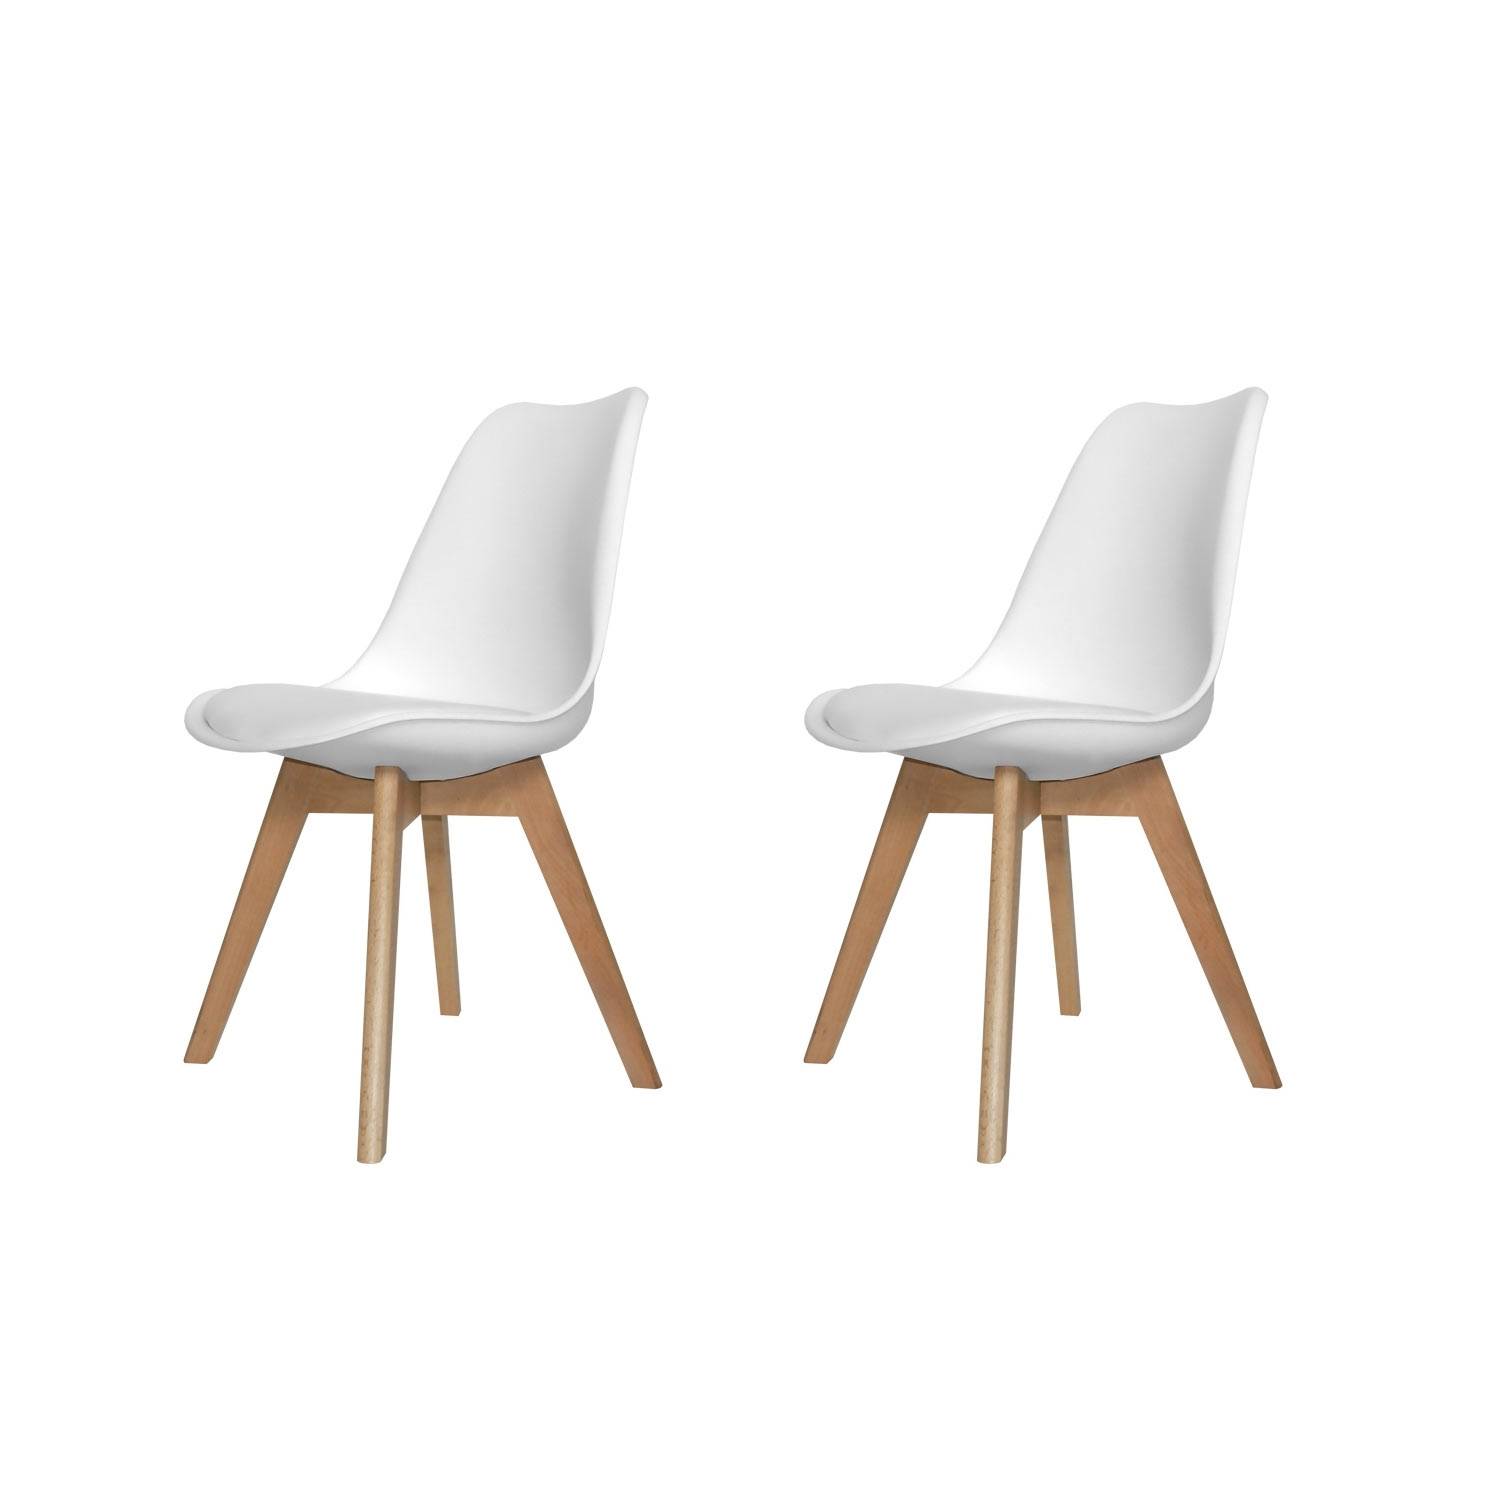 PACK 2 CHAISES NEW TOWER WOOD BLANCHES